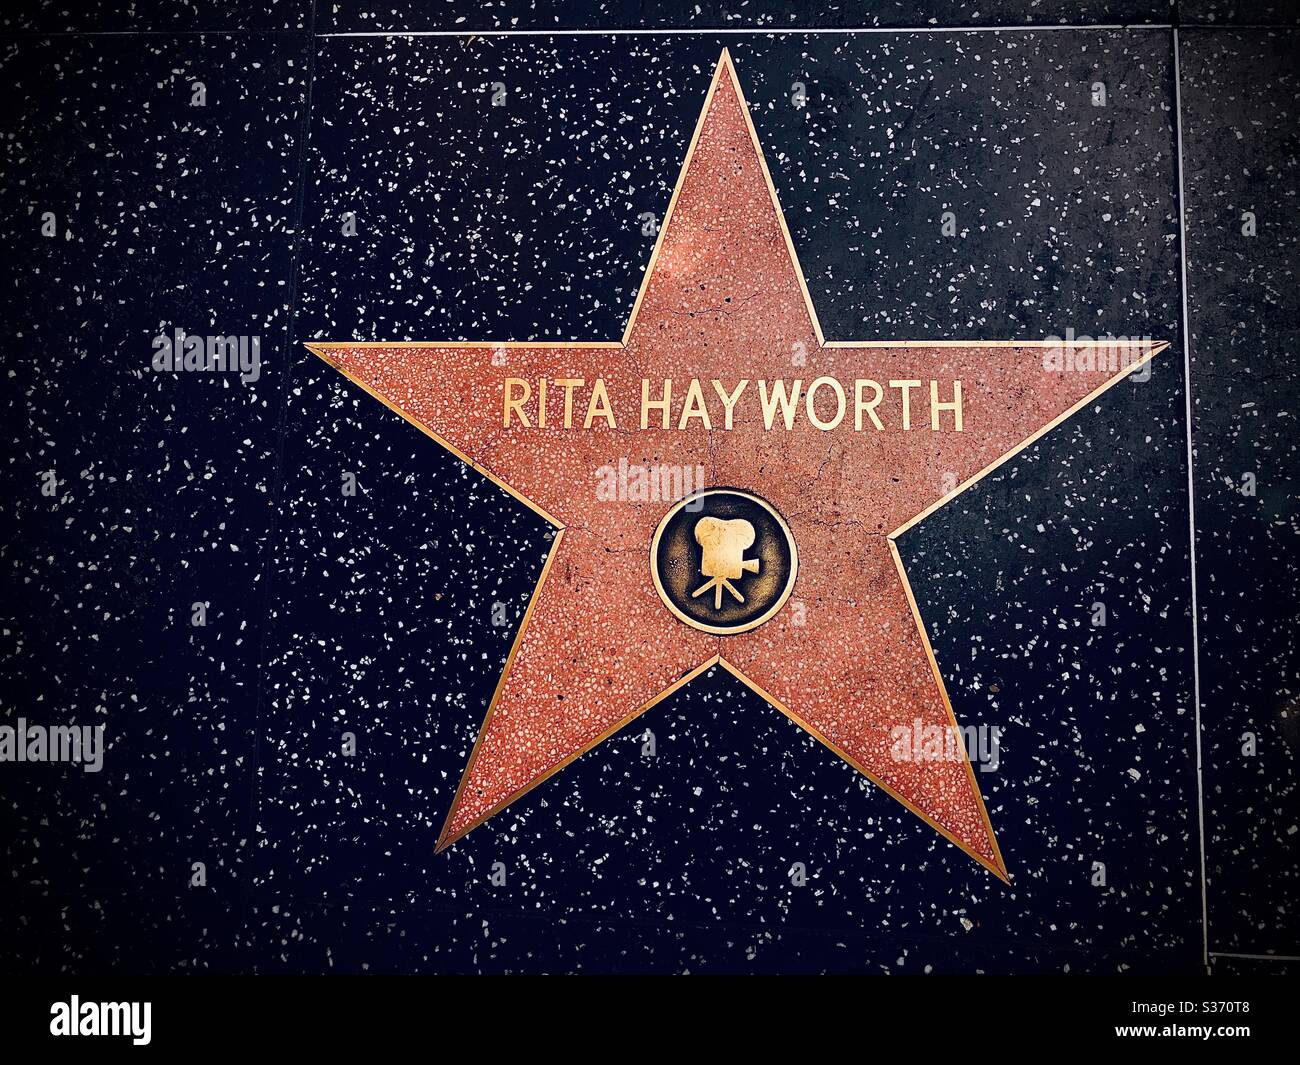 Hollywood, California/USA. August 3rd, 2019. The star on the Hollywood Walk of Fame for actress Rita Hayworth. Stock Photo